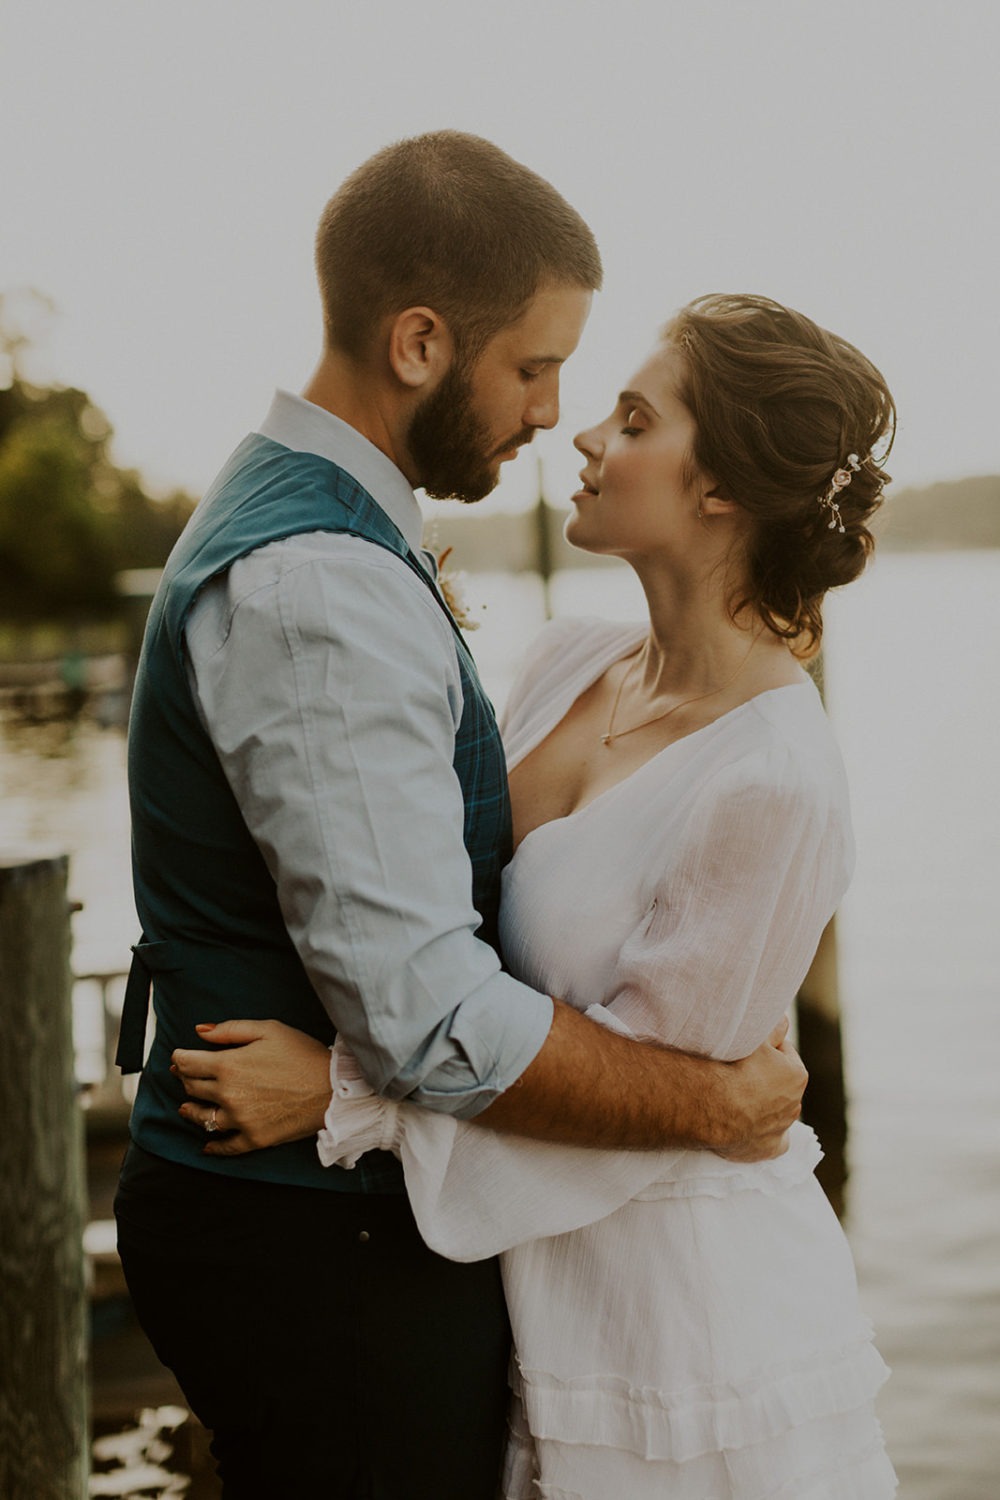 Couple embraces by a lake at sunset wedding 